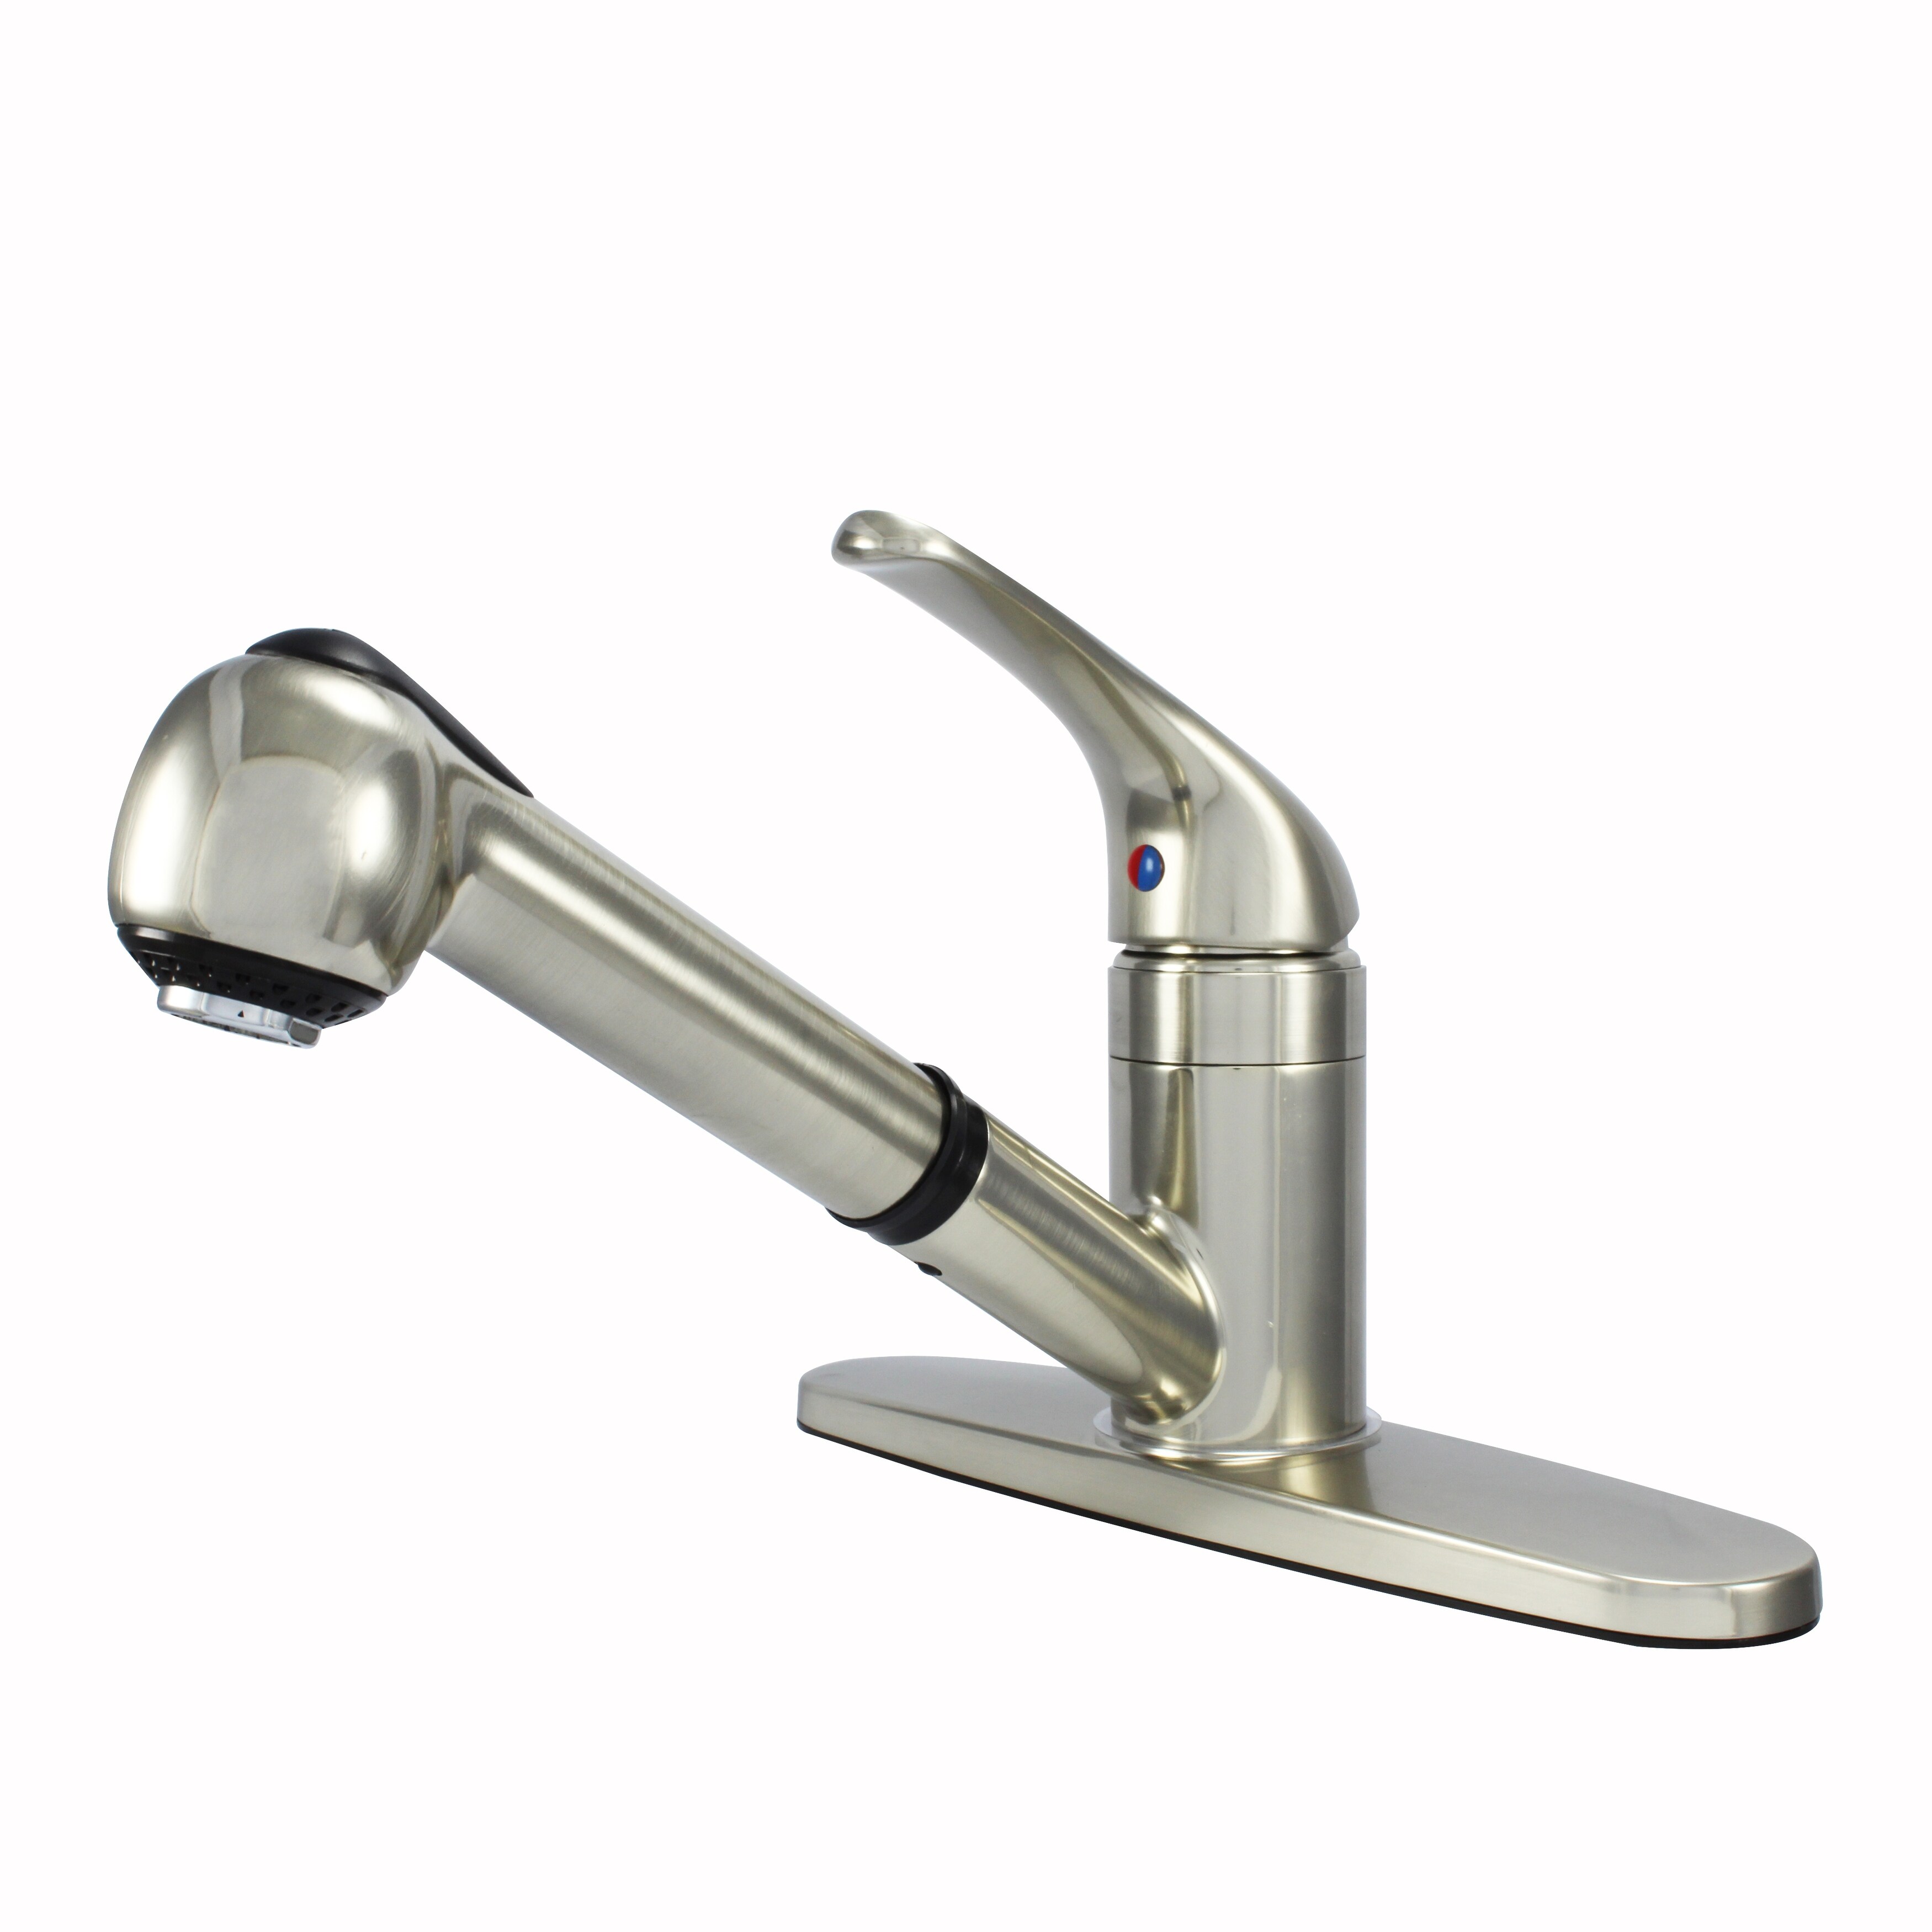 Hybrid Metal Deck Kitchen Sink Faucet Single Handle, Ceramic Cart. with Pull Out Sprayer Chrome or Brushed Nickel - Brushed Nickel